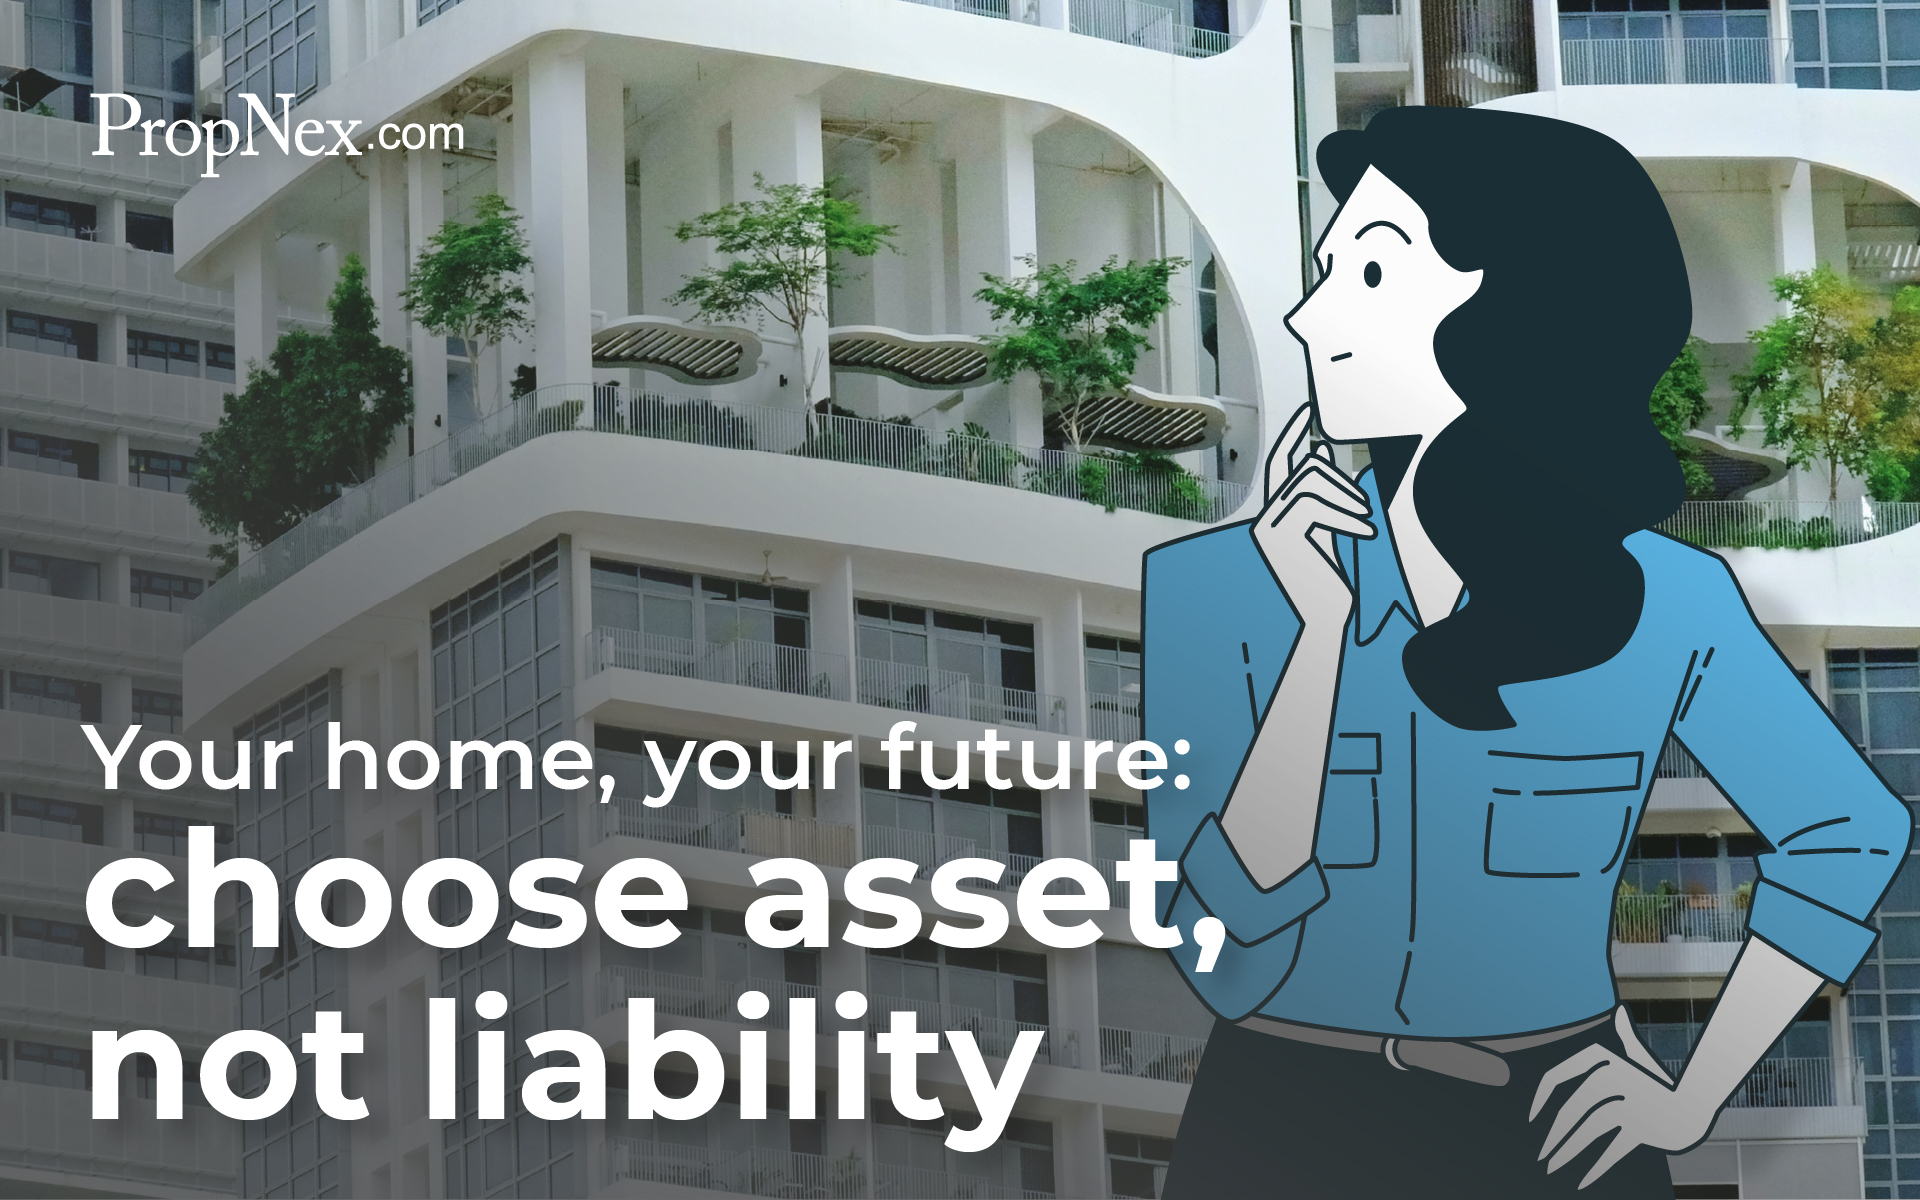 Your home, your future: choose asset, not liability